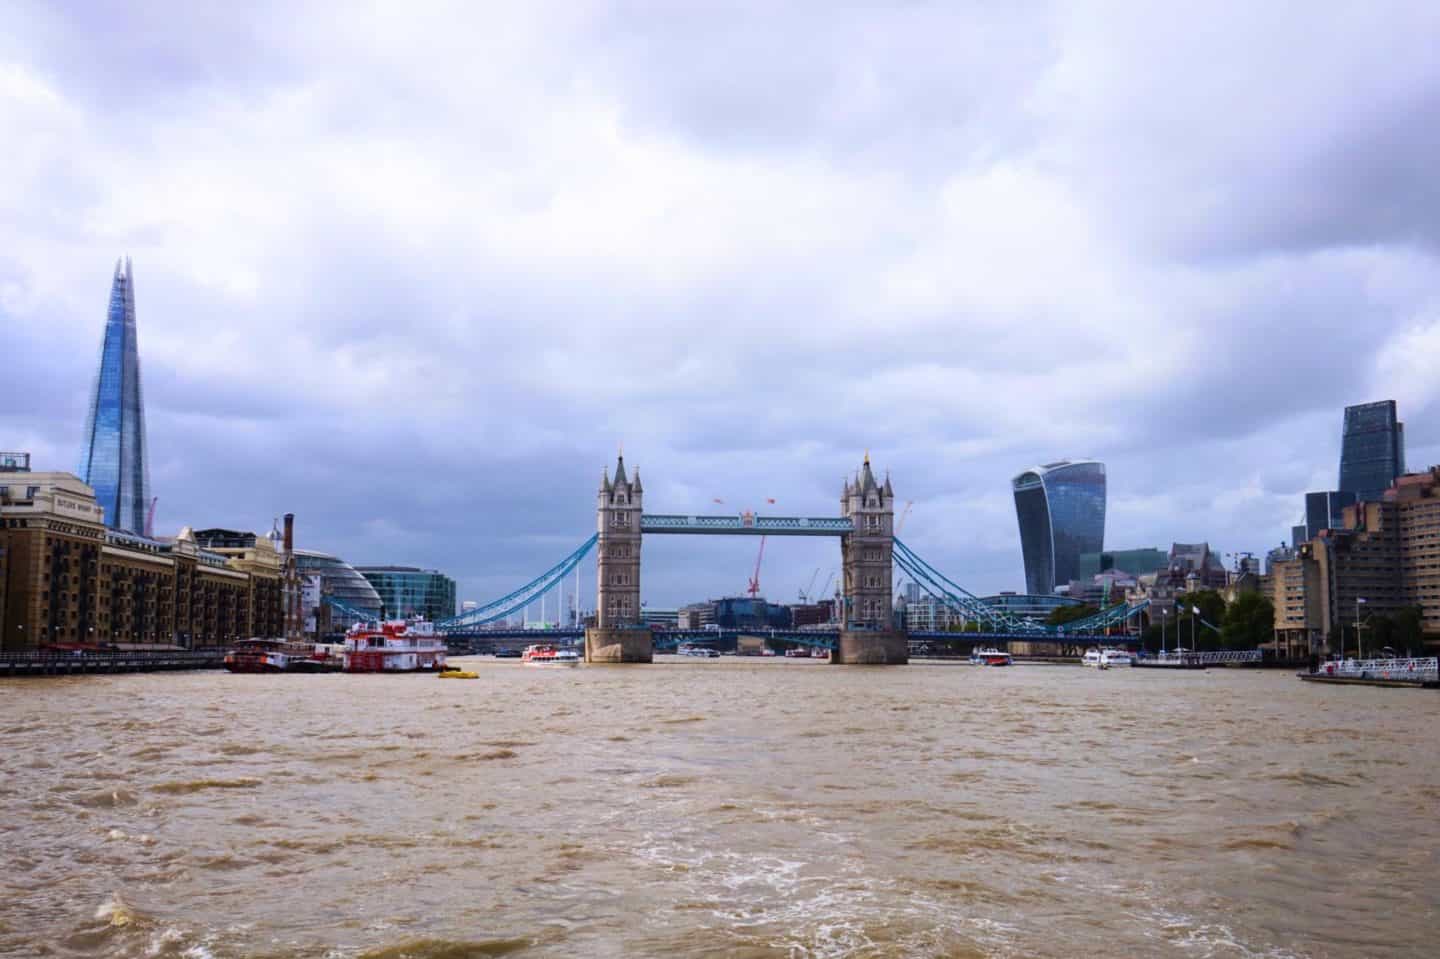 Cloudy and Rainy Skies on River Thames in London with Tower Bridge and Shard showing